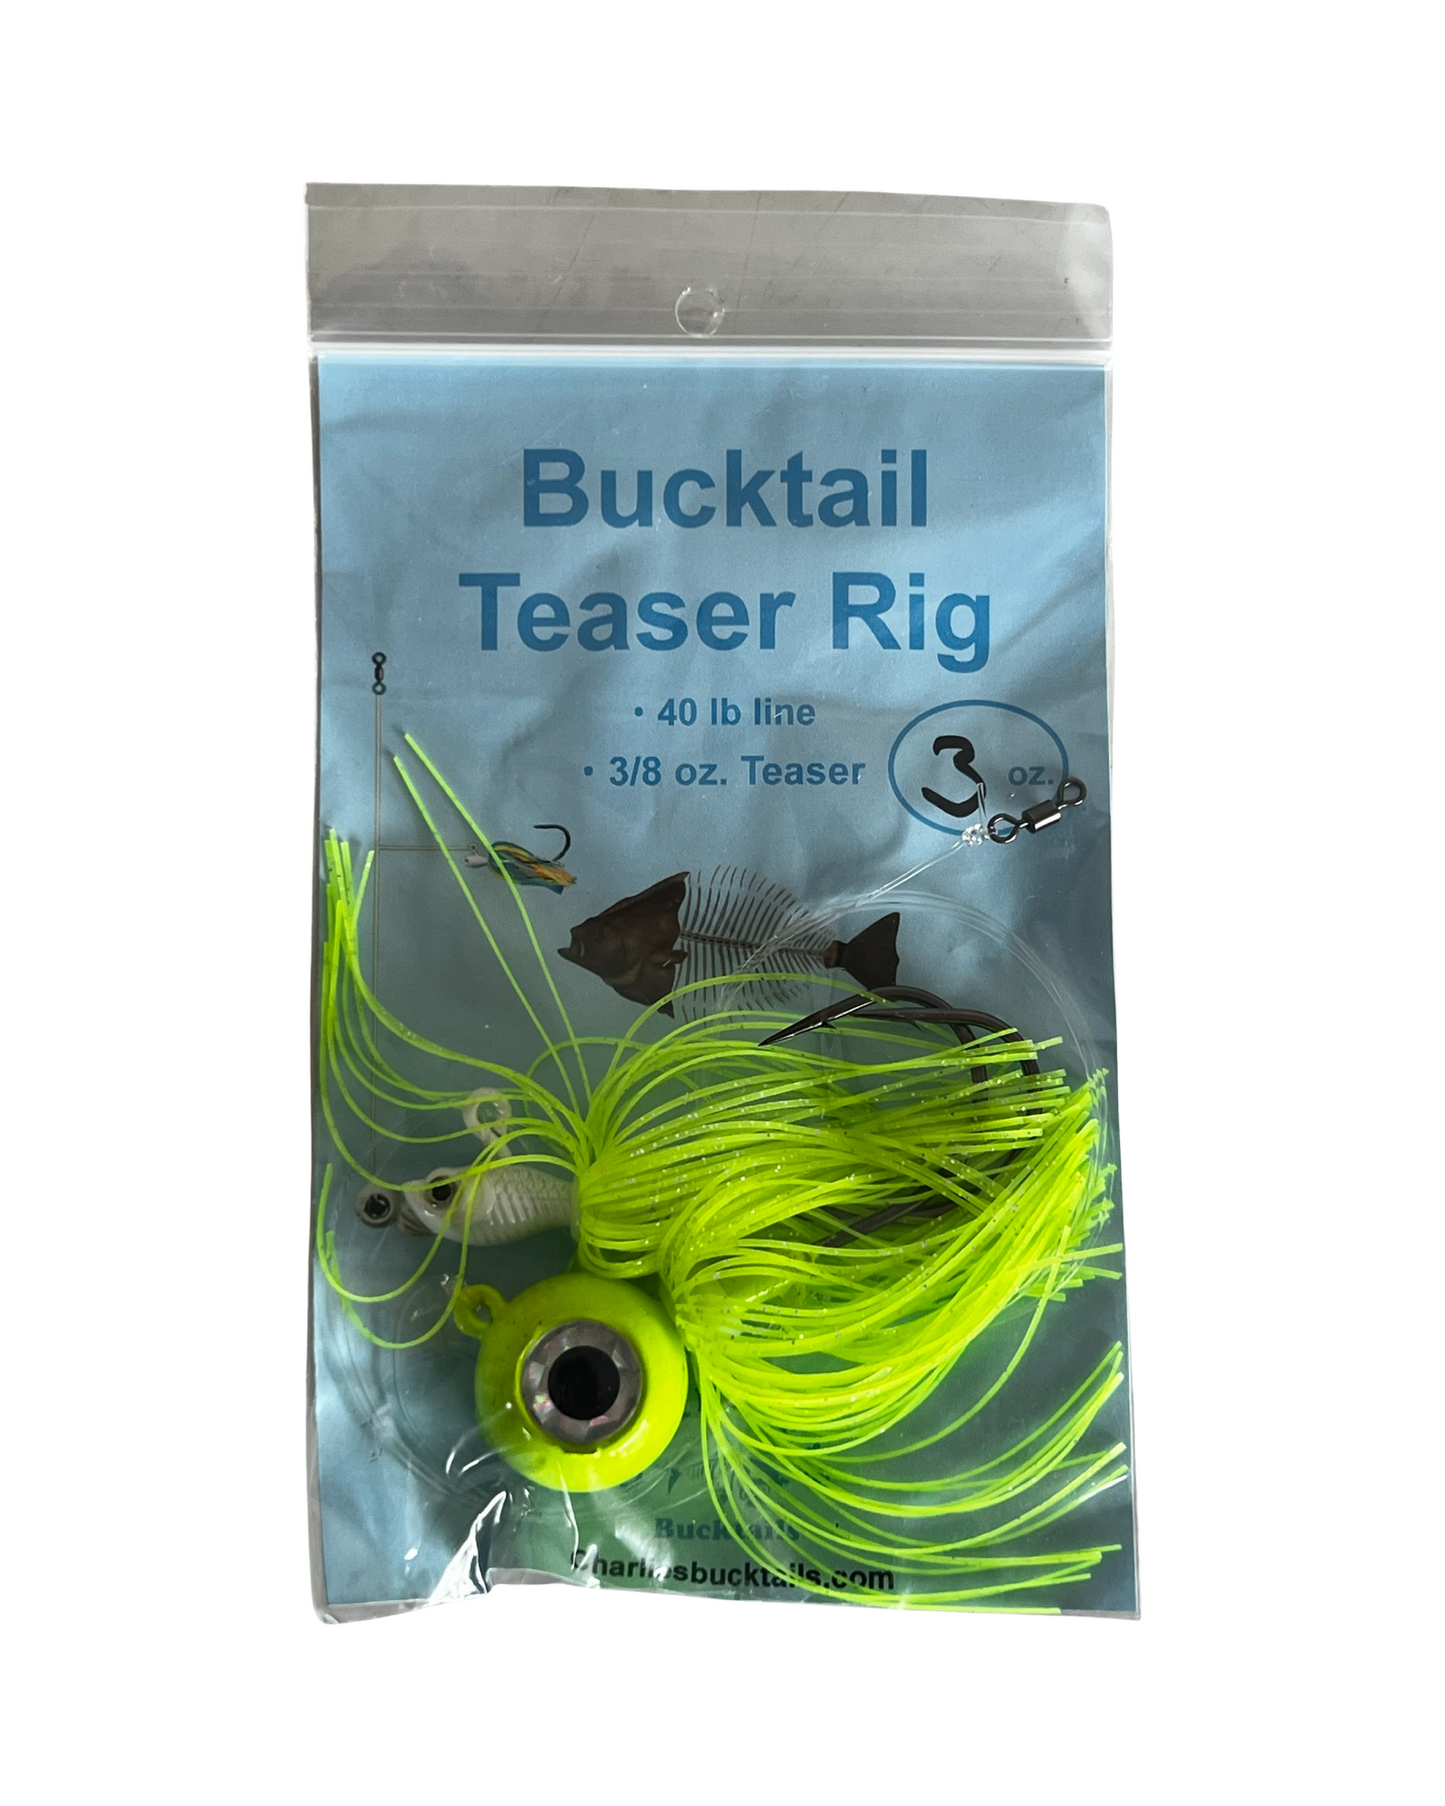 Bucktail and Teaser Pre Rigs